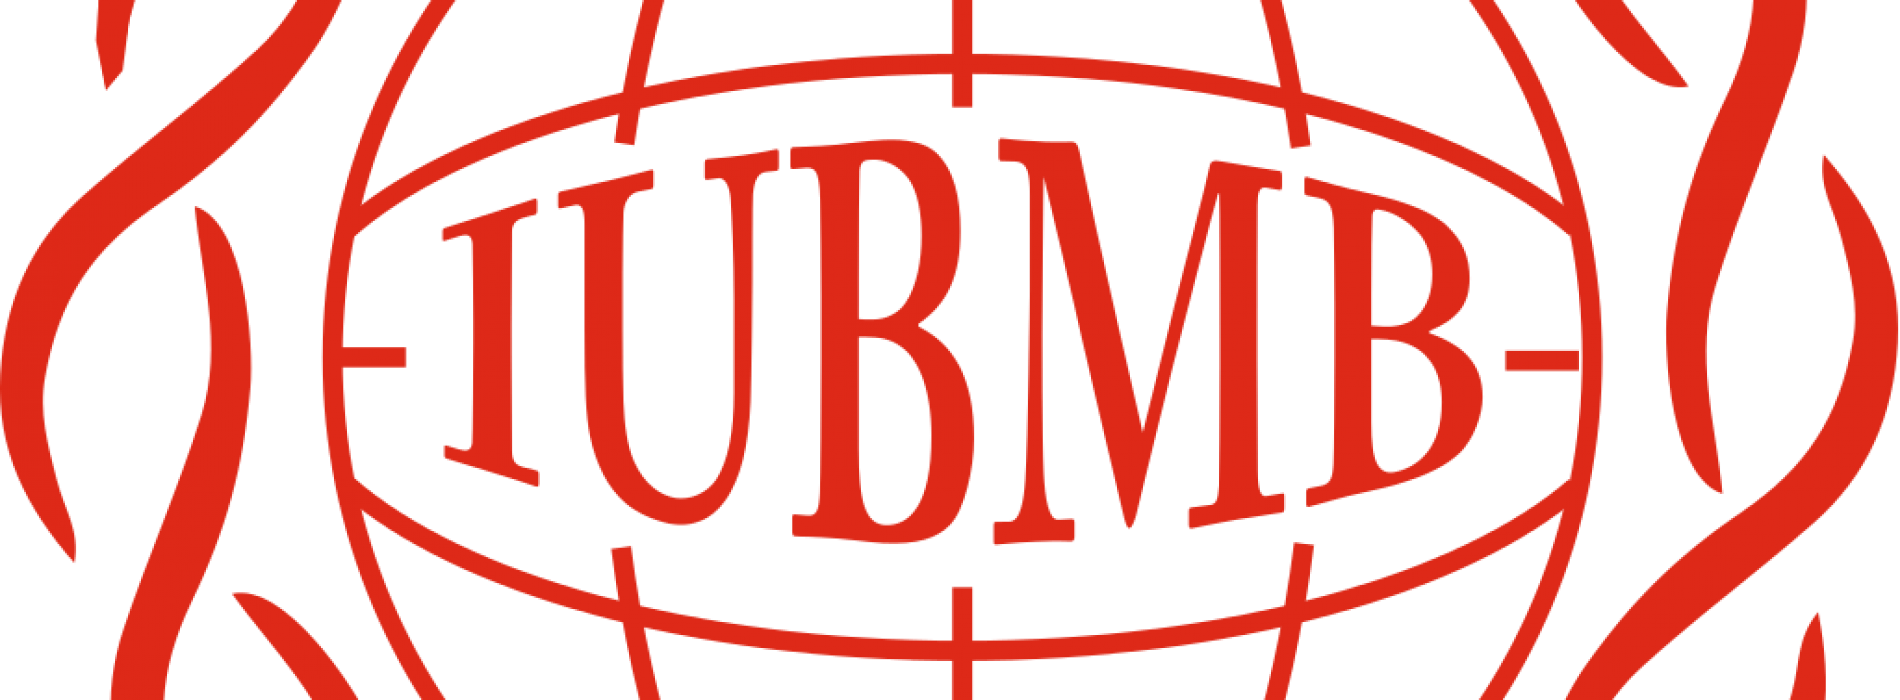 First issue of IUBMB News